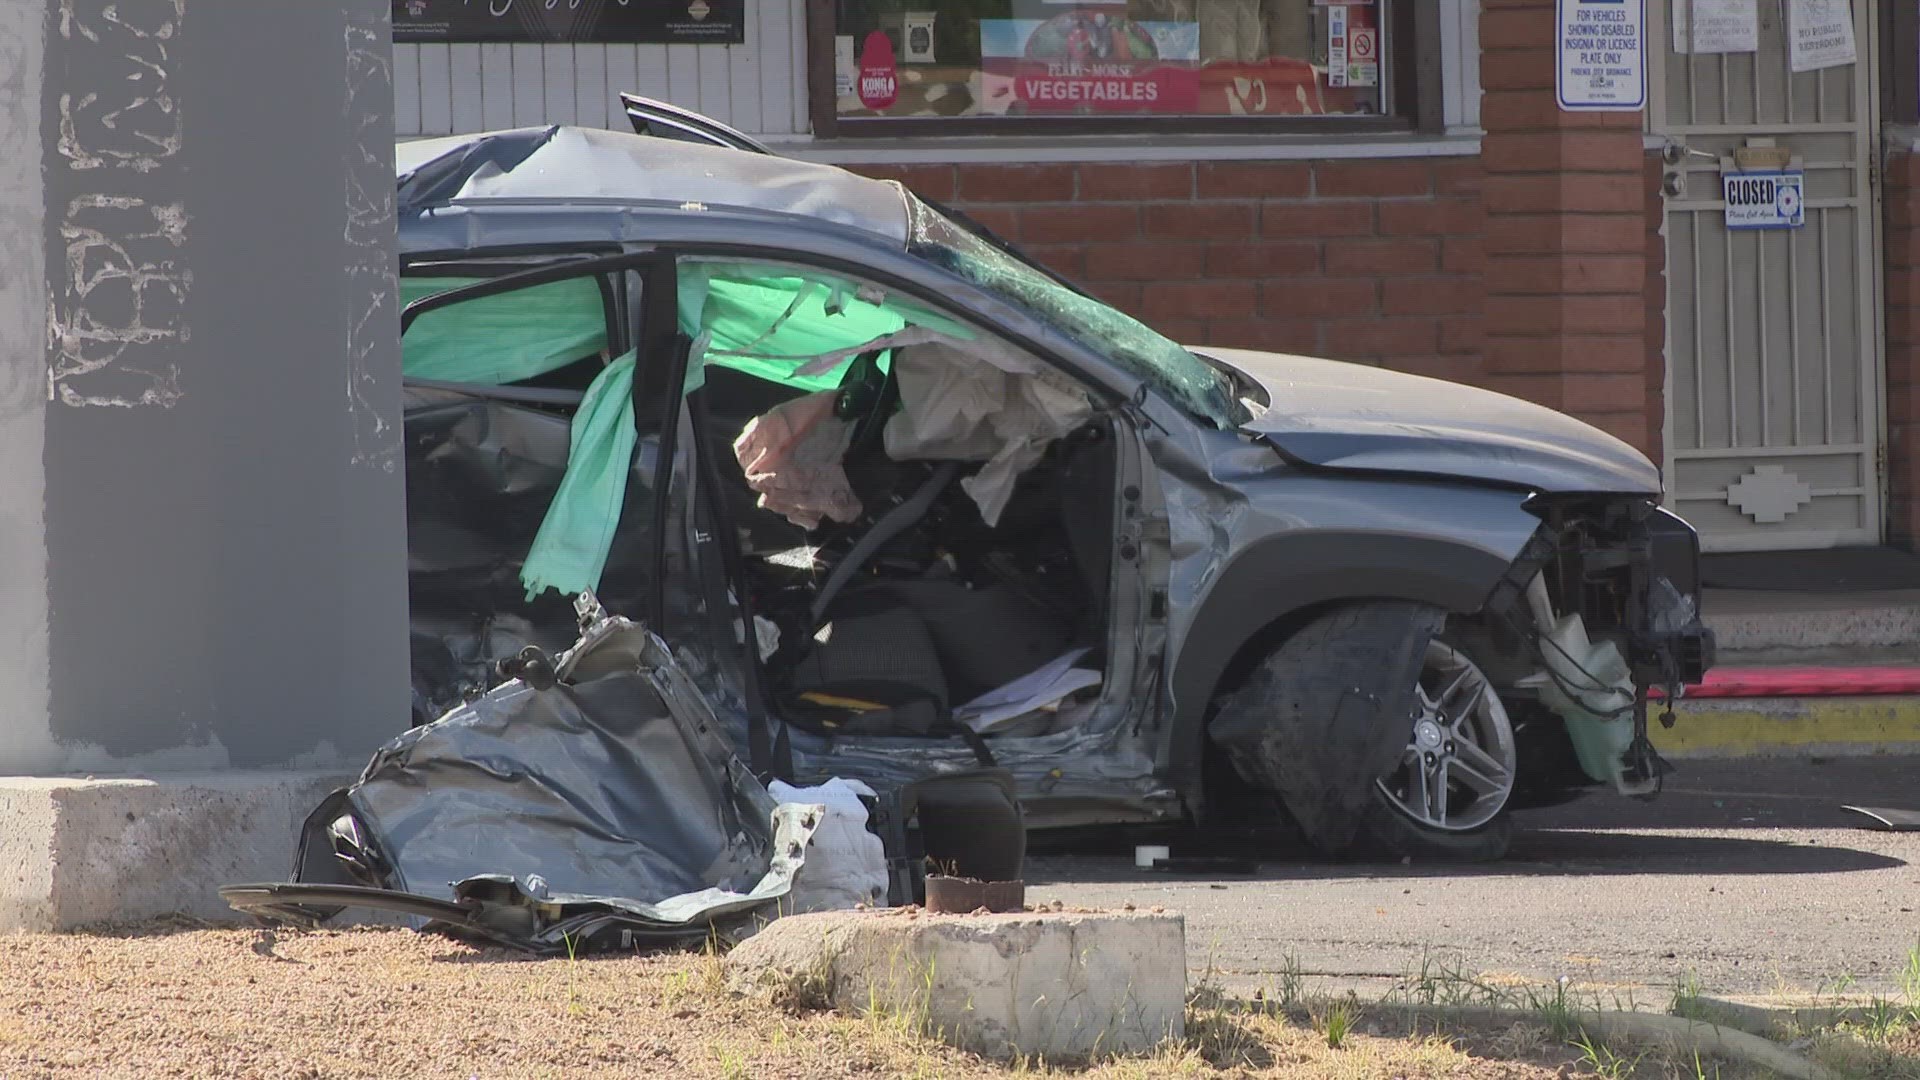 Police said the two-vehicle crash happened near Seventh Avenue and Baseline Road.